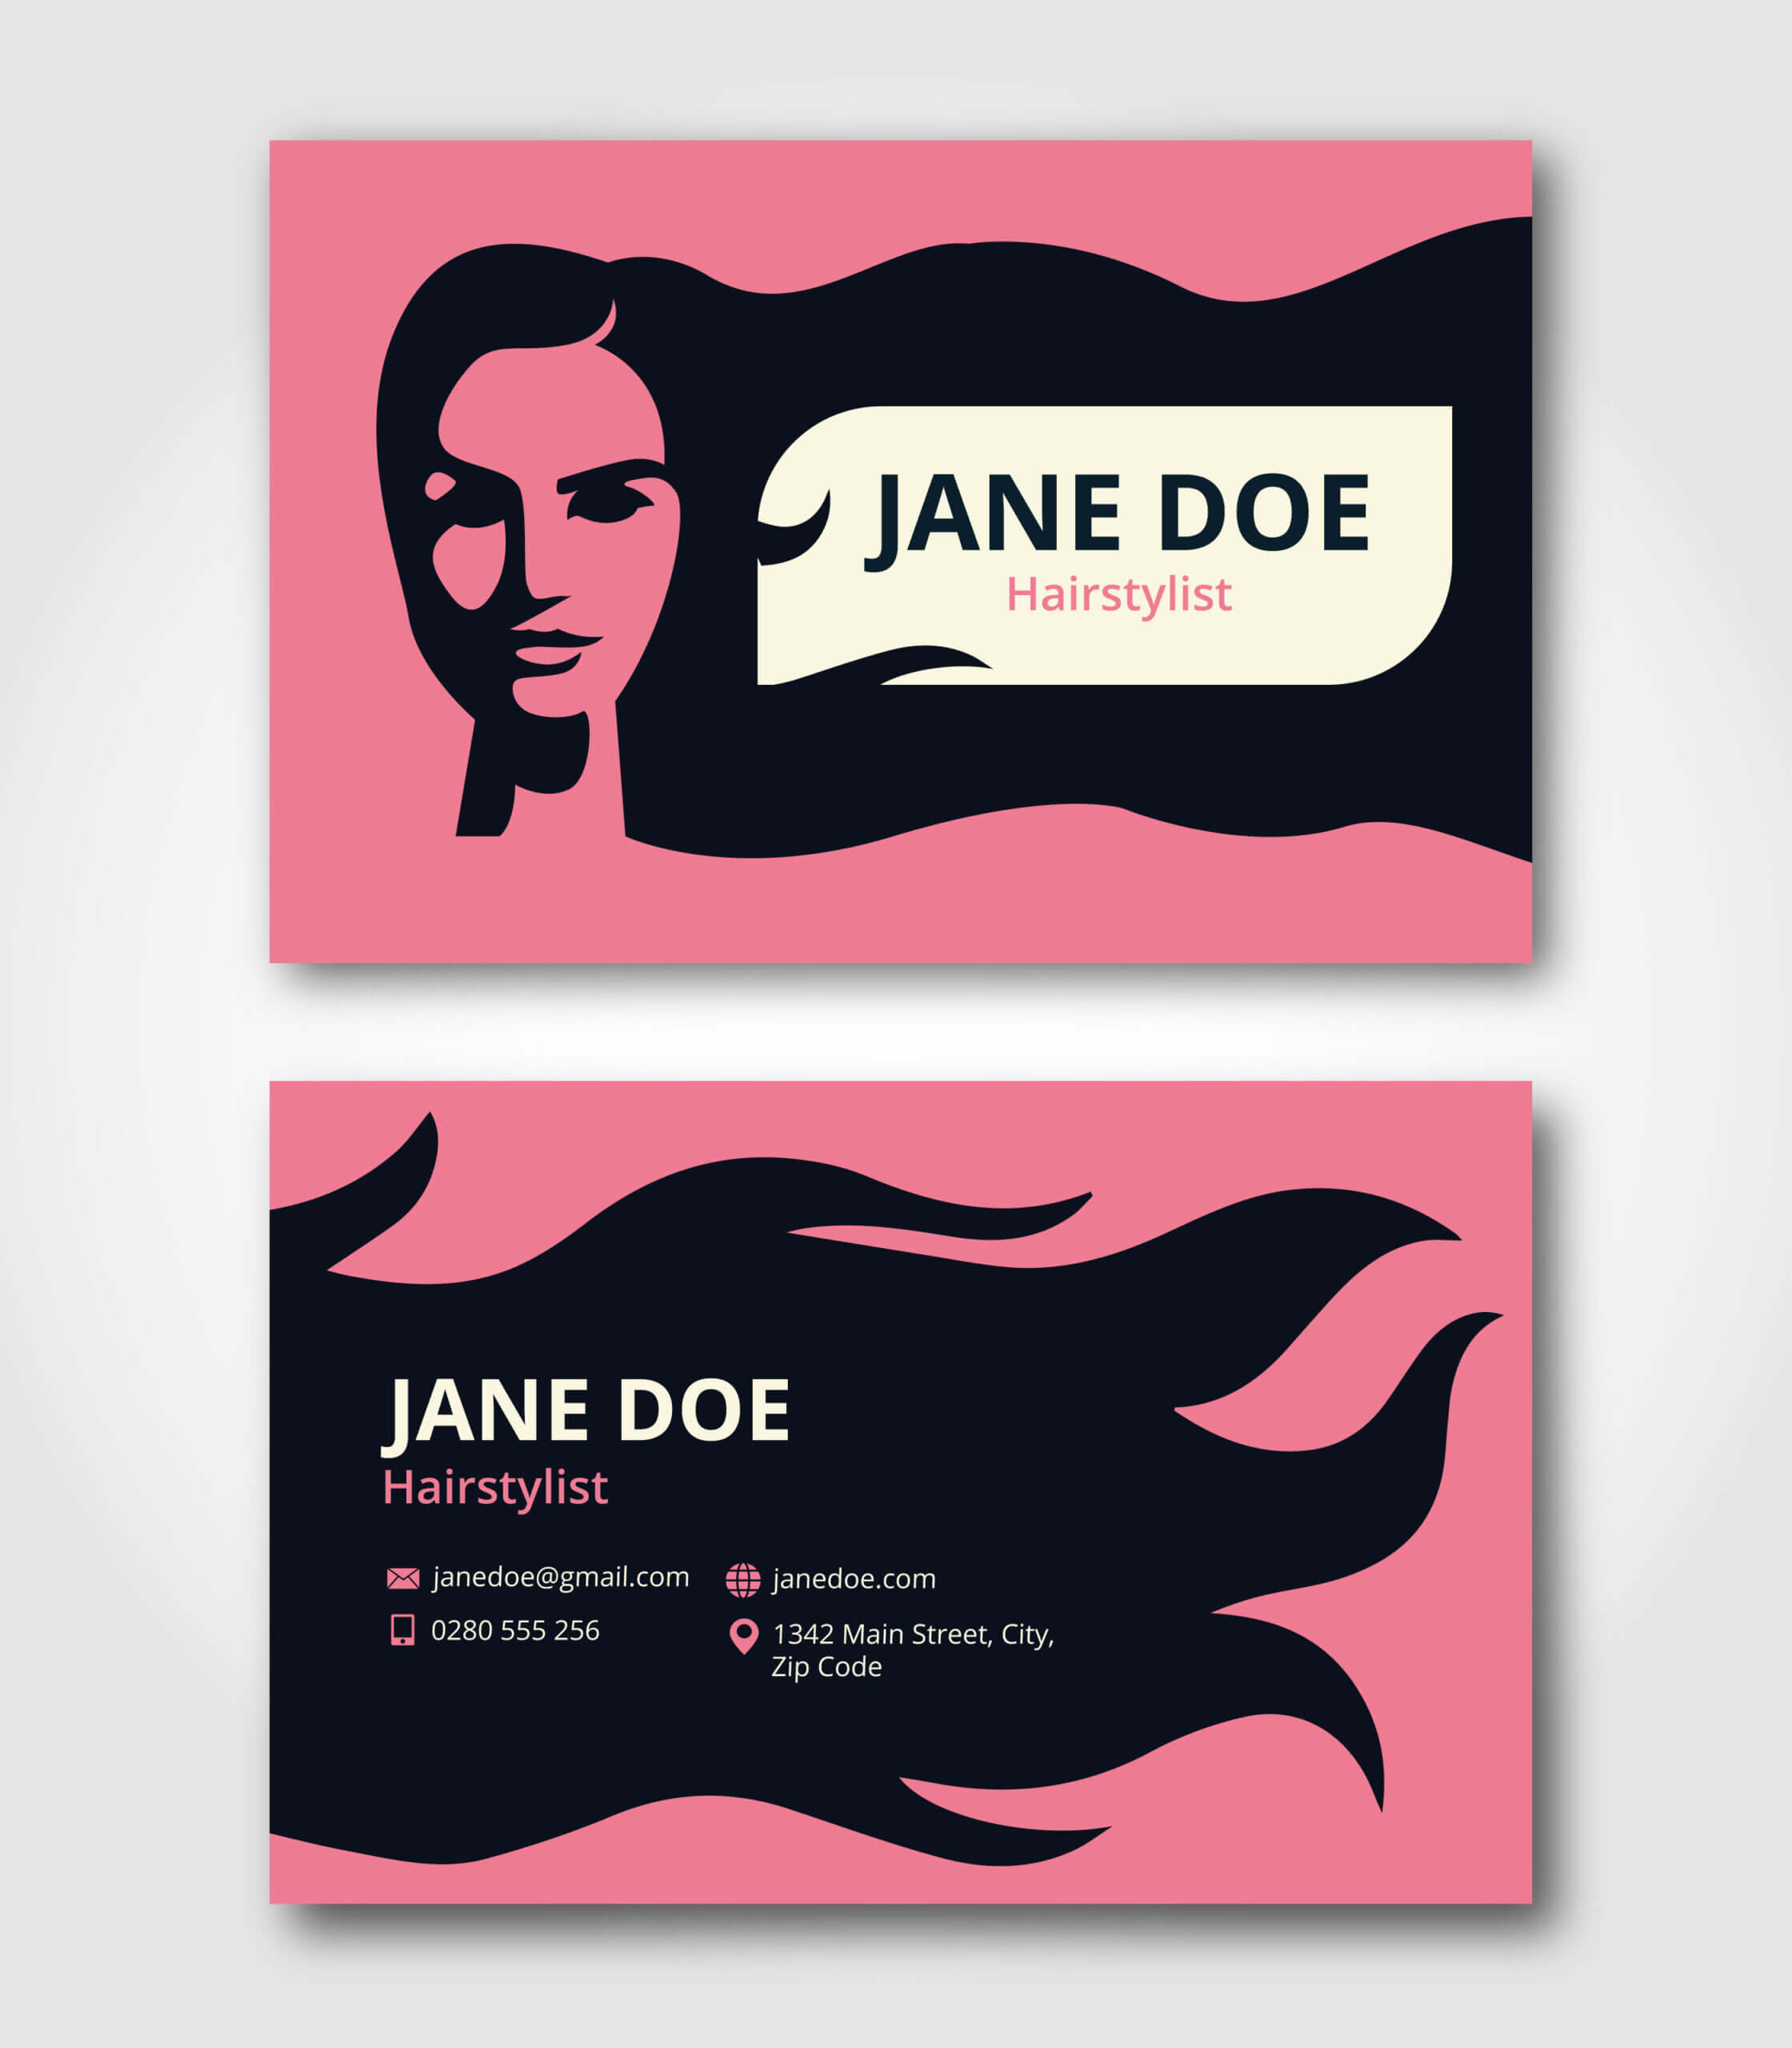 Hairstylist Business Card Template – Download Free Vectors In Hair Salon Business Card Template